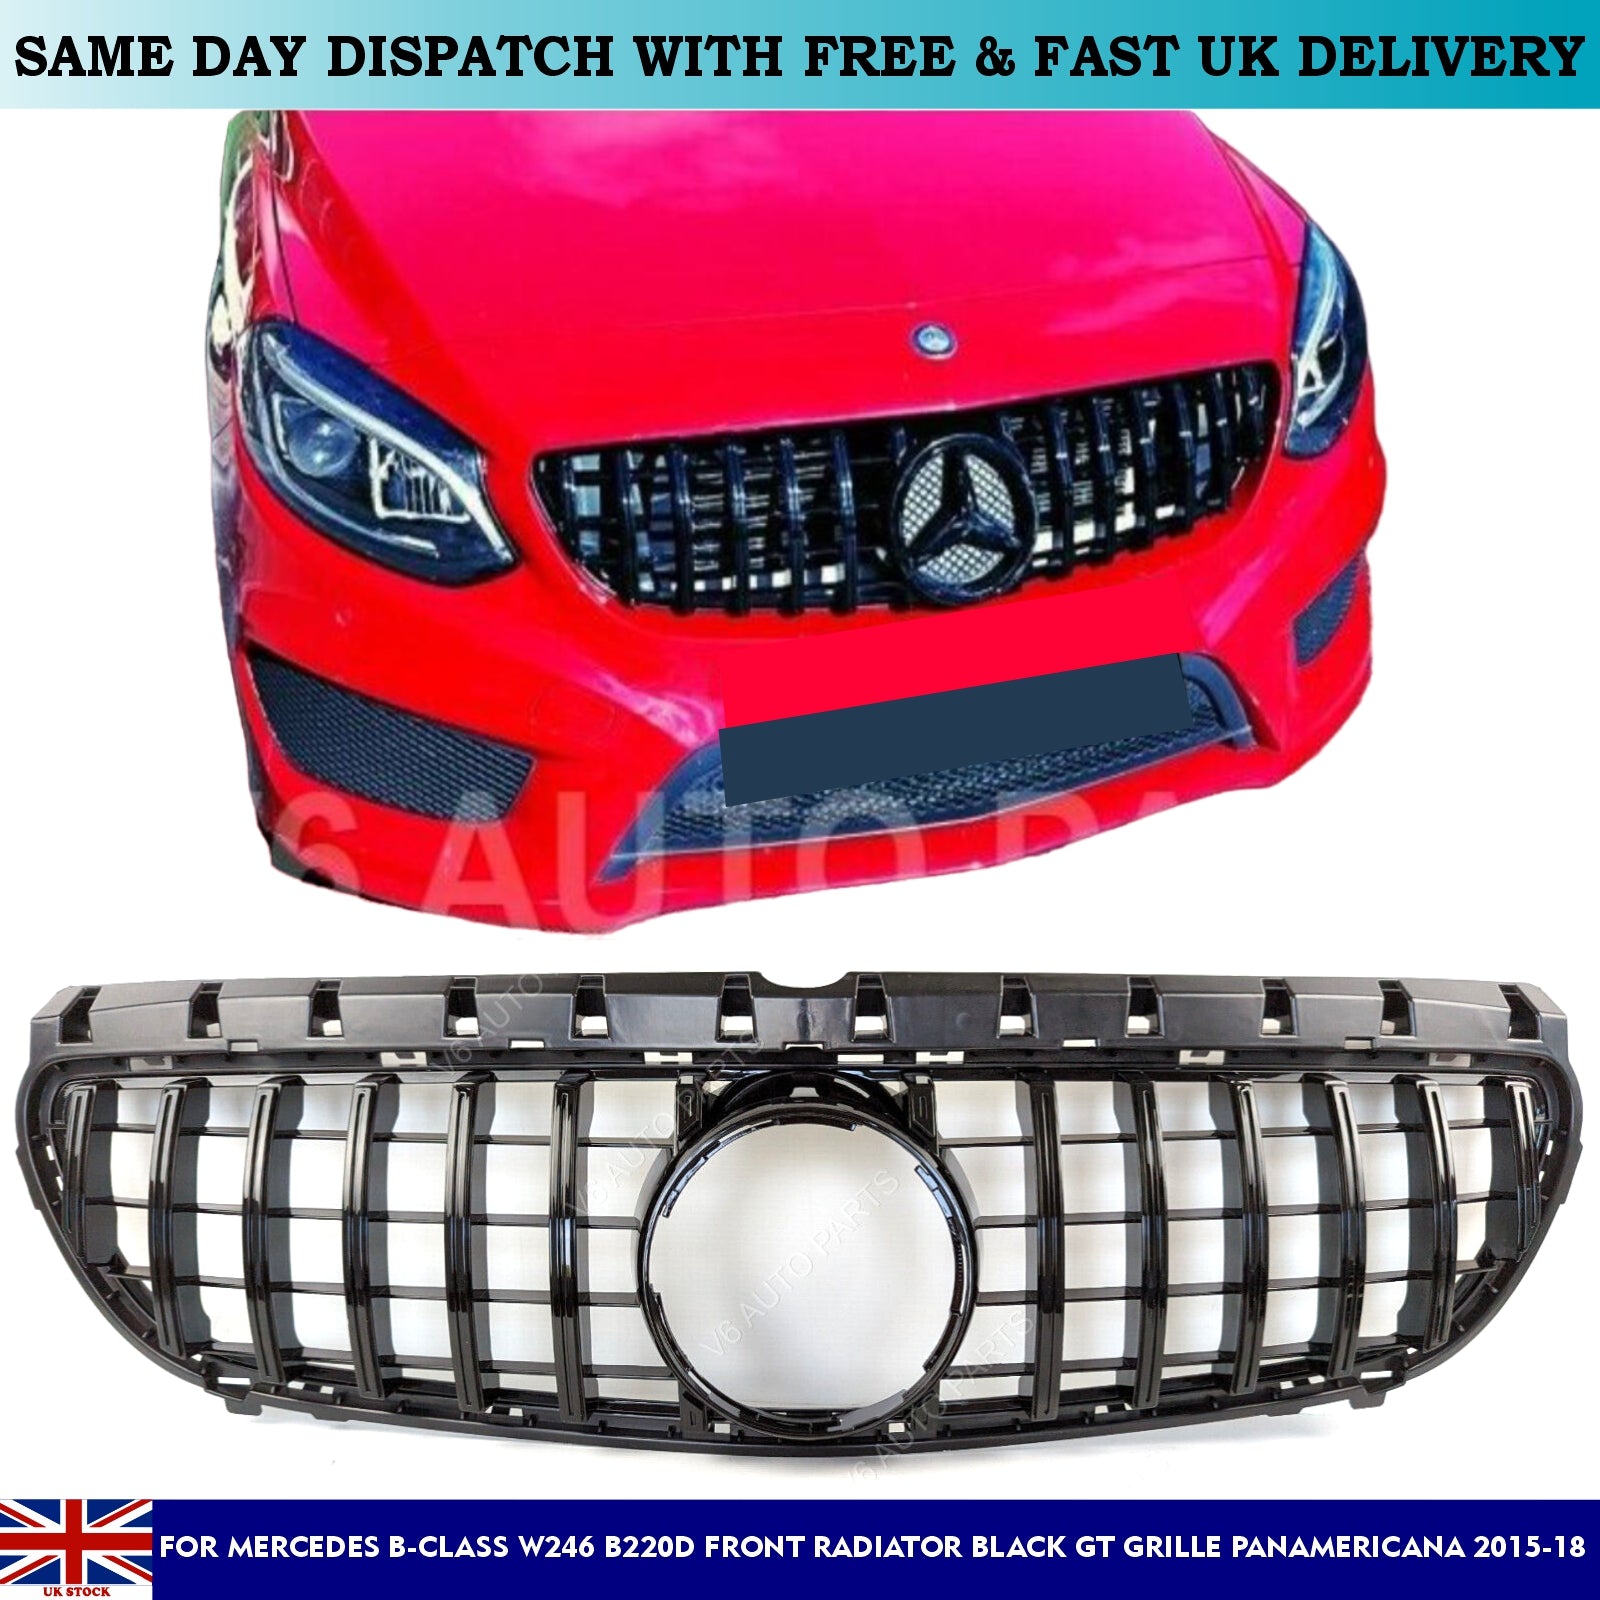 For Mercedes B-Class W246 B220d Front Radiator Black Grille 2015-18 GT Panamericana